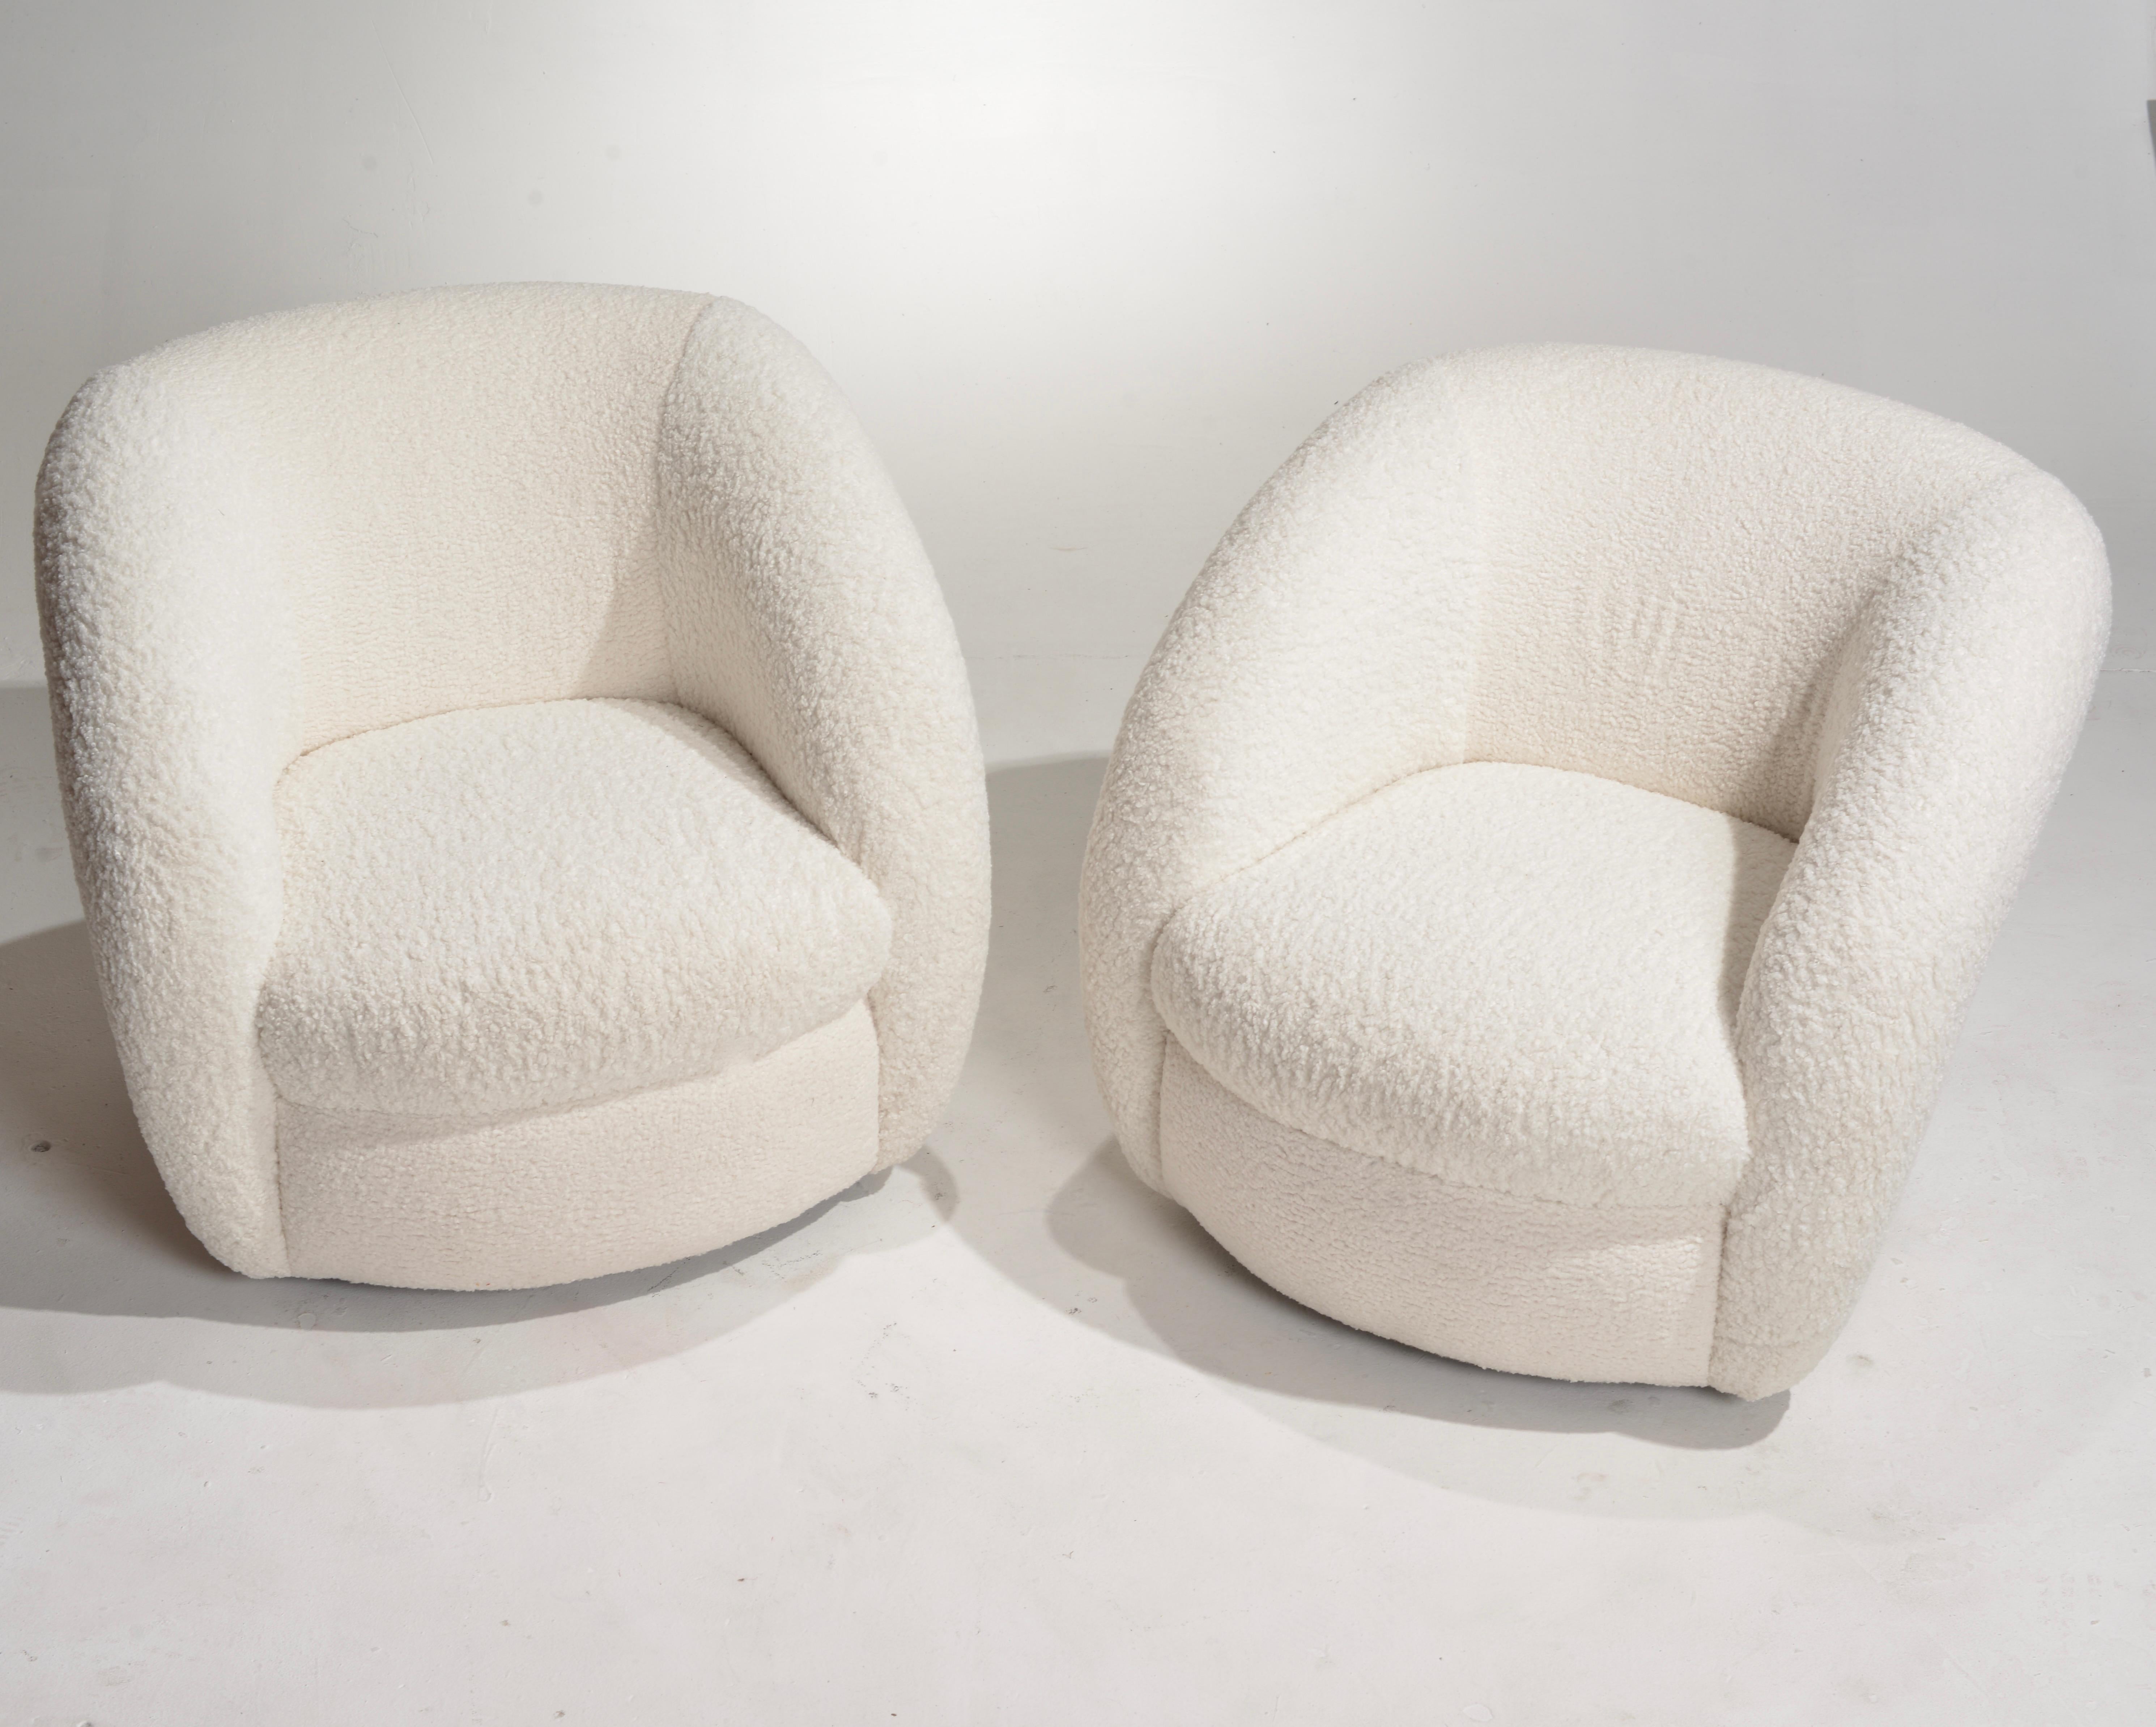 A duo of plush boucle vintage swivel lounge chairs featuring fresh upholstery in a textured bone white fabric. Large legless swivel base creates a minimal curved silhouette while raised arms connect to create the seat back.